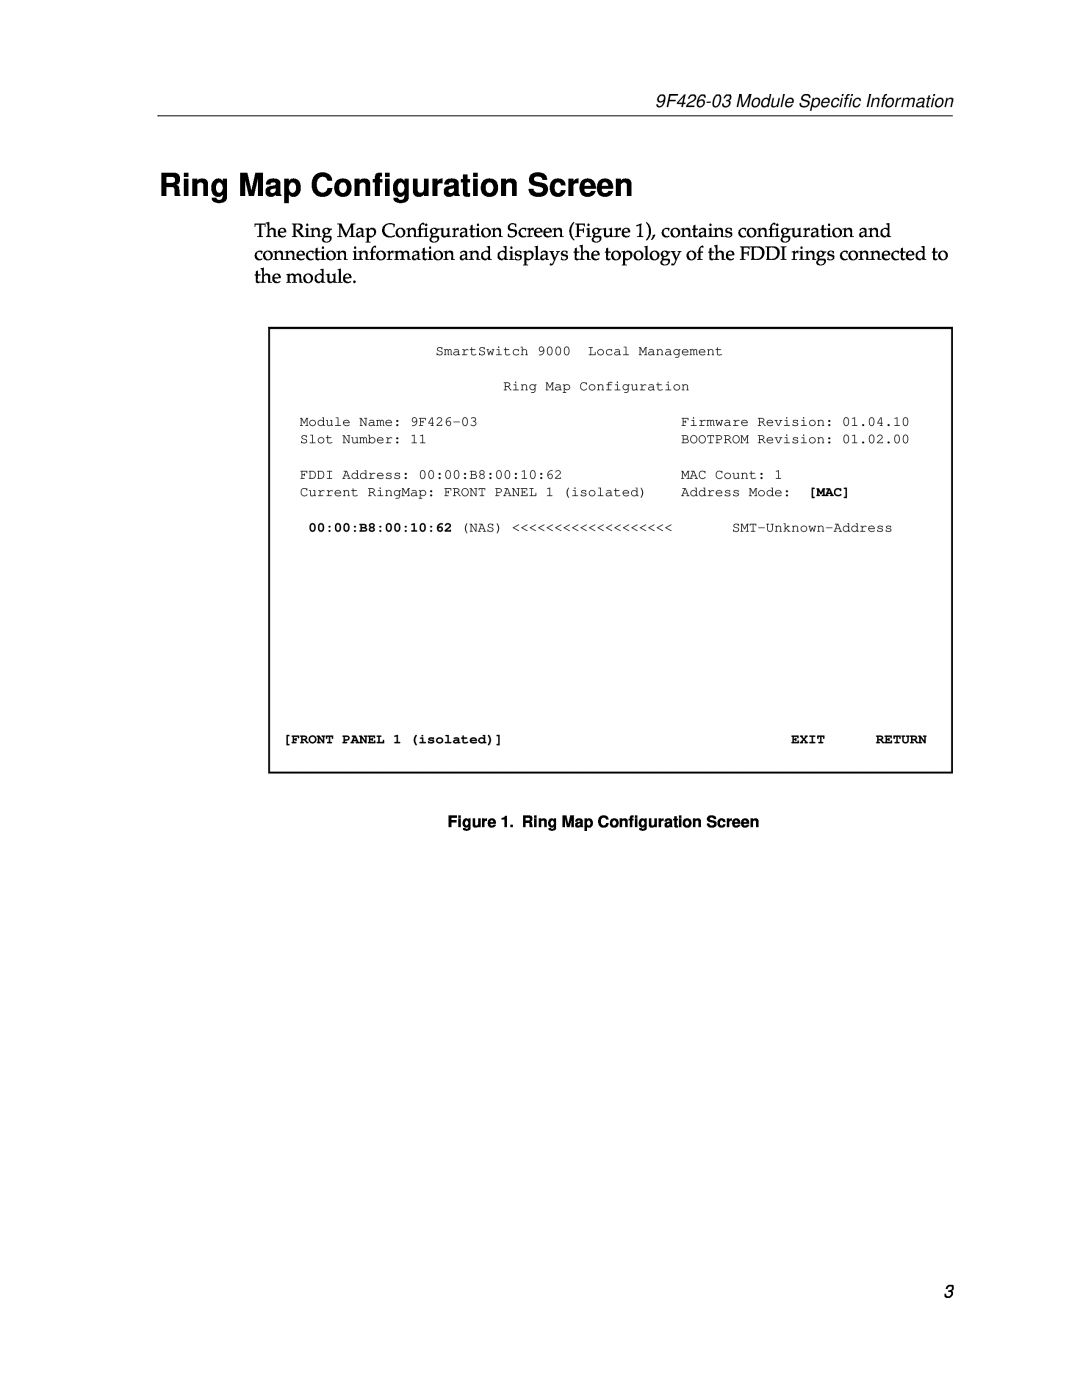 Cabletron Systems appendix Ring Map Conﬁguration Screen, 9F426-03 Module Speciﬁc Information, isolated, Exit, Return 